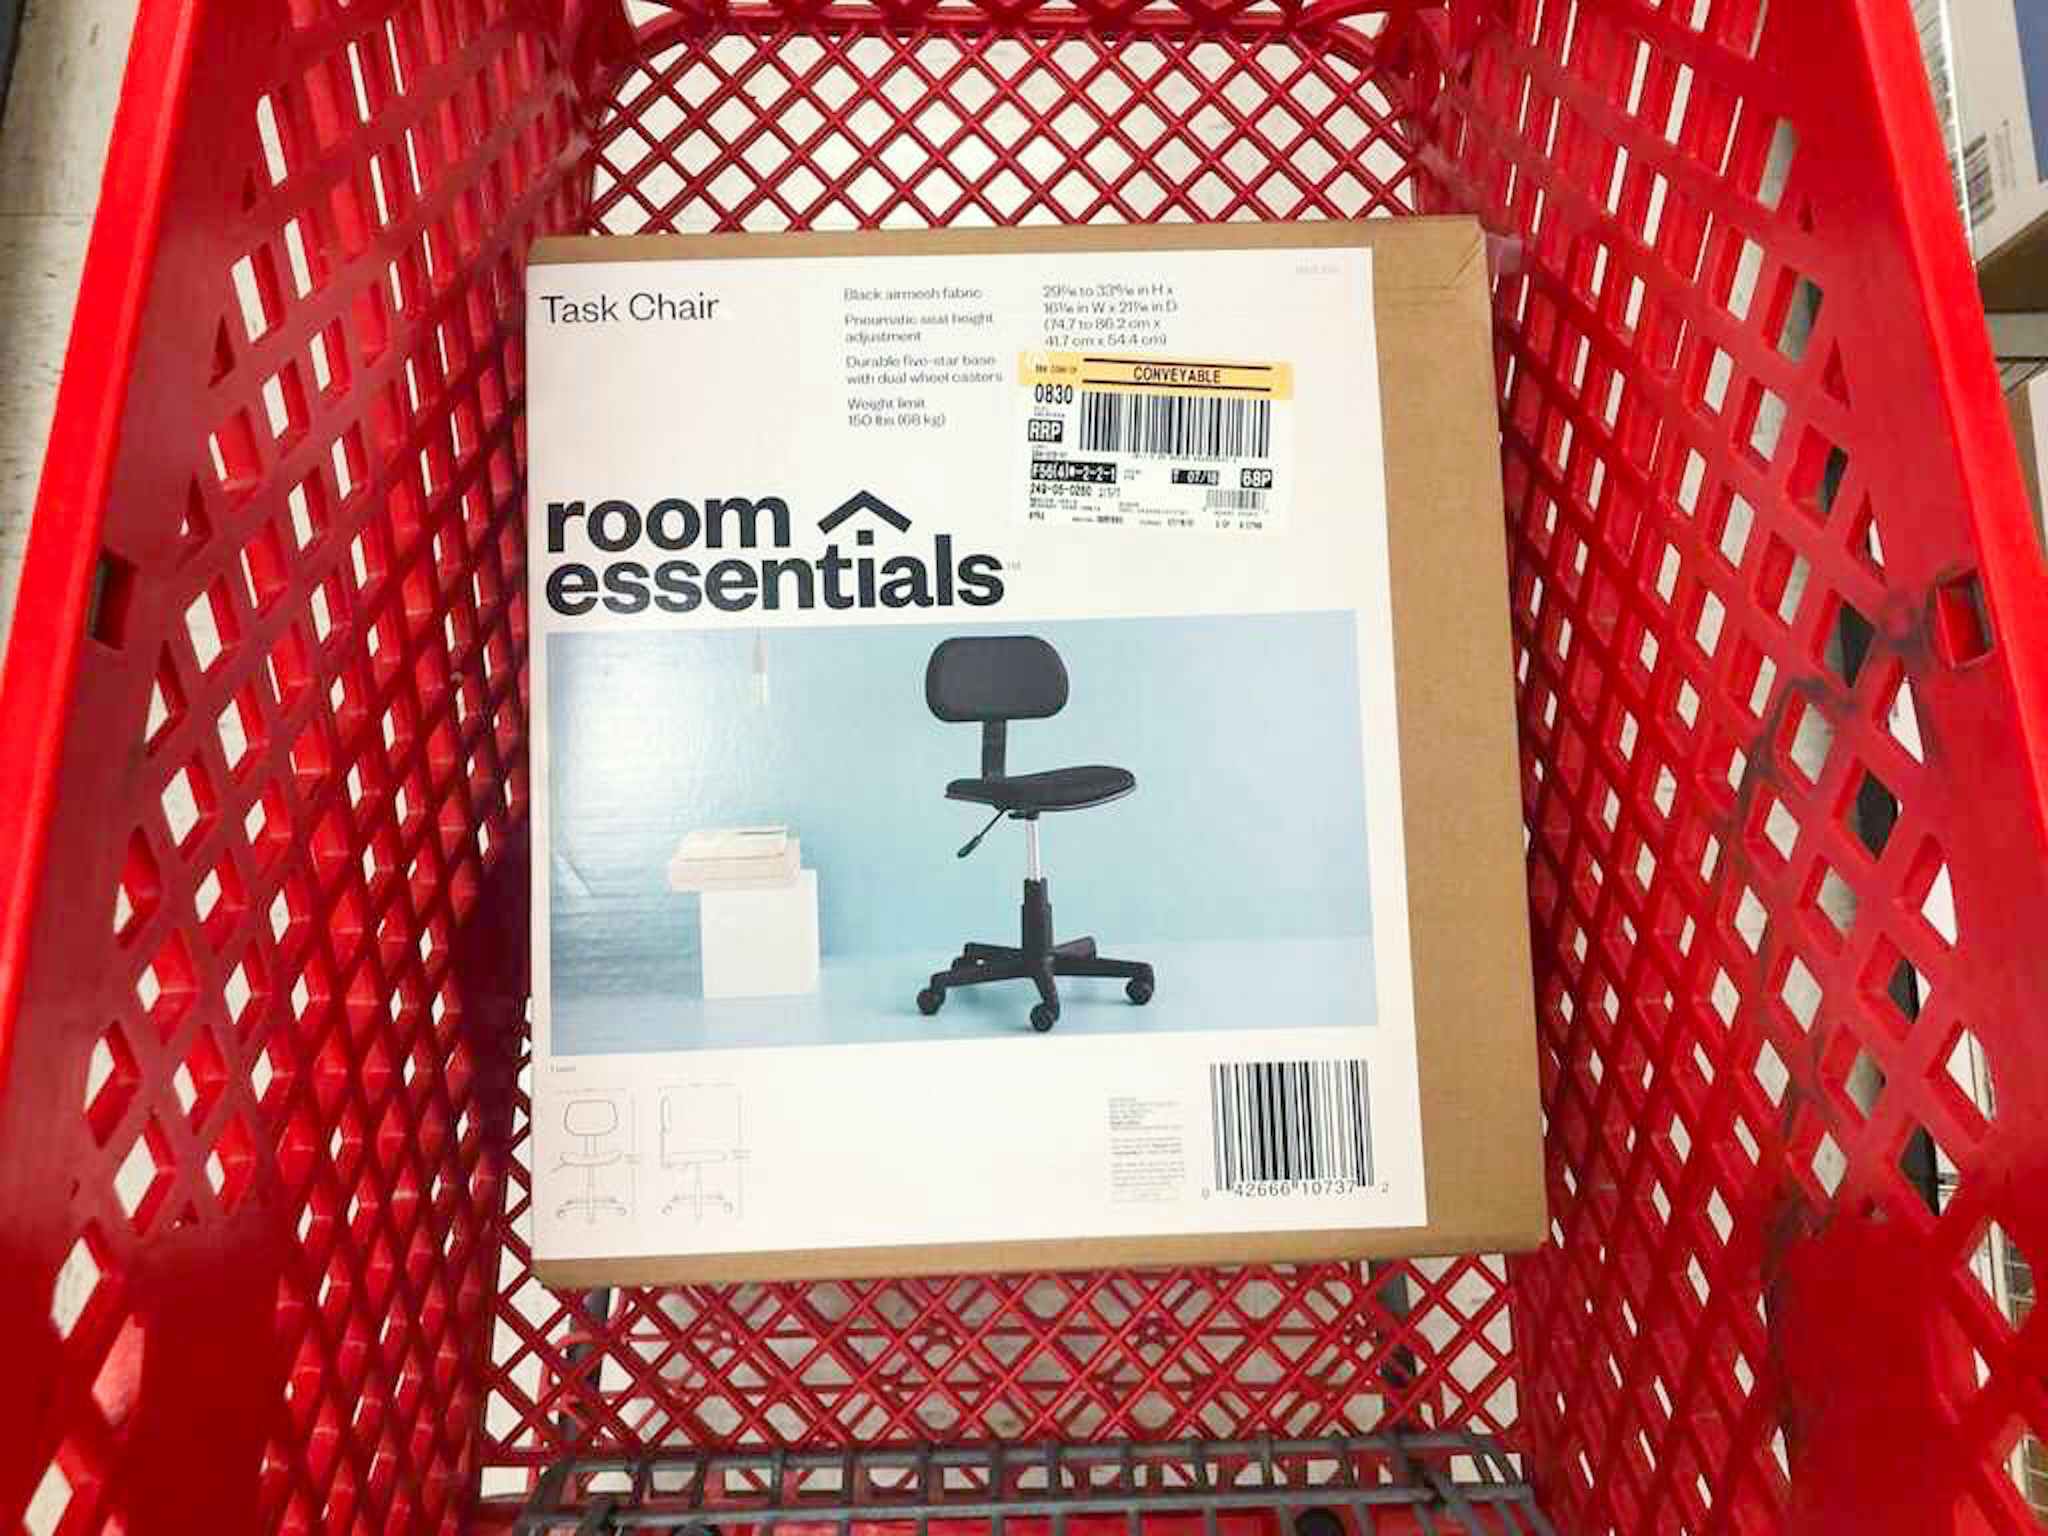 room essentials task chair in a target cart